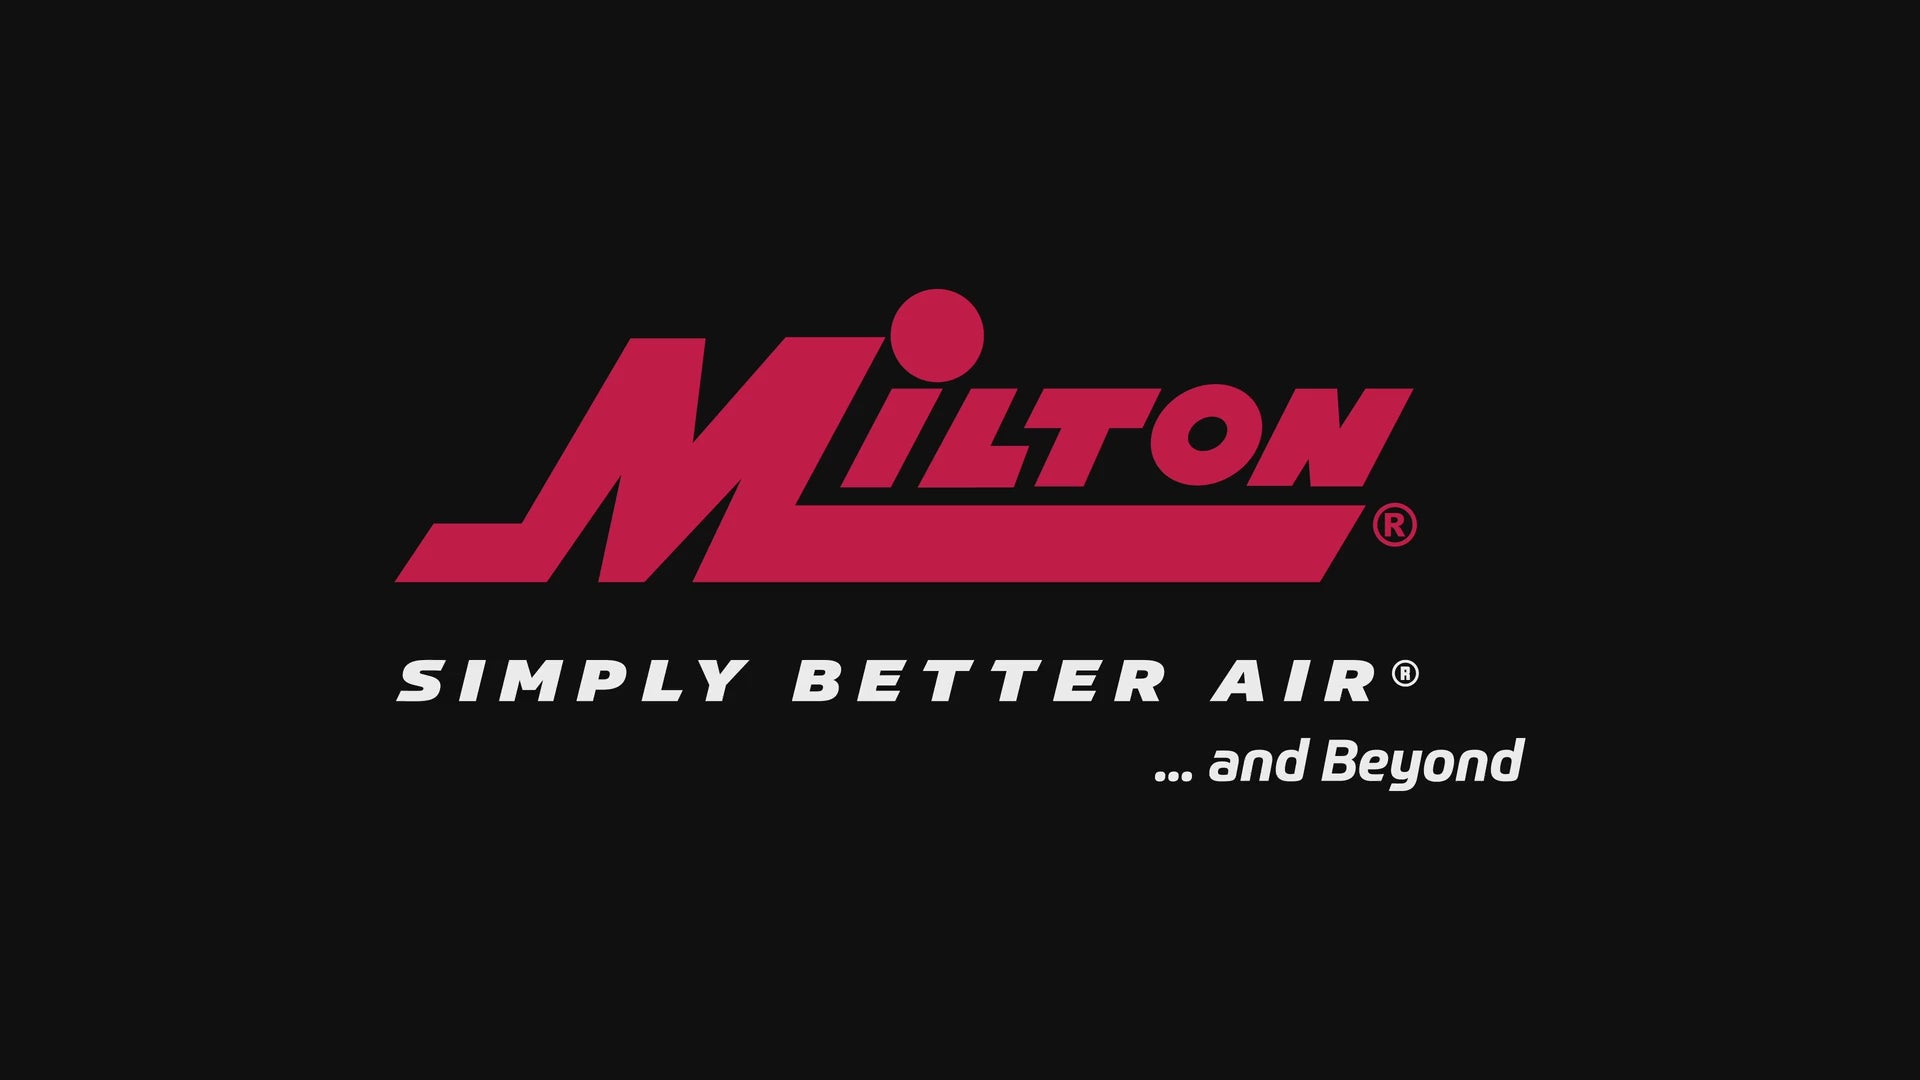 NEW & IMPROVED - Milton® Tire Inflator Gauge with Dual Head Air Chuck 15” Air Hose 10-160 PSI